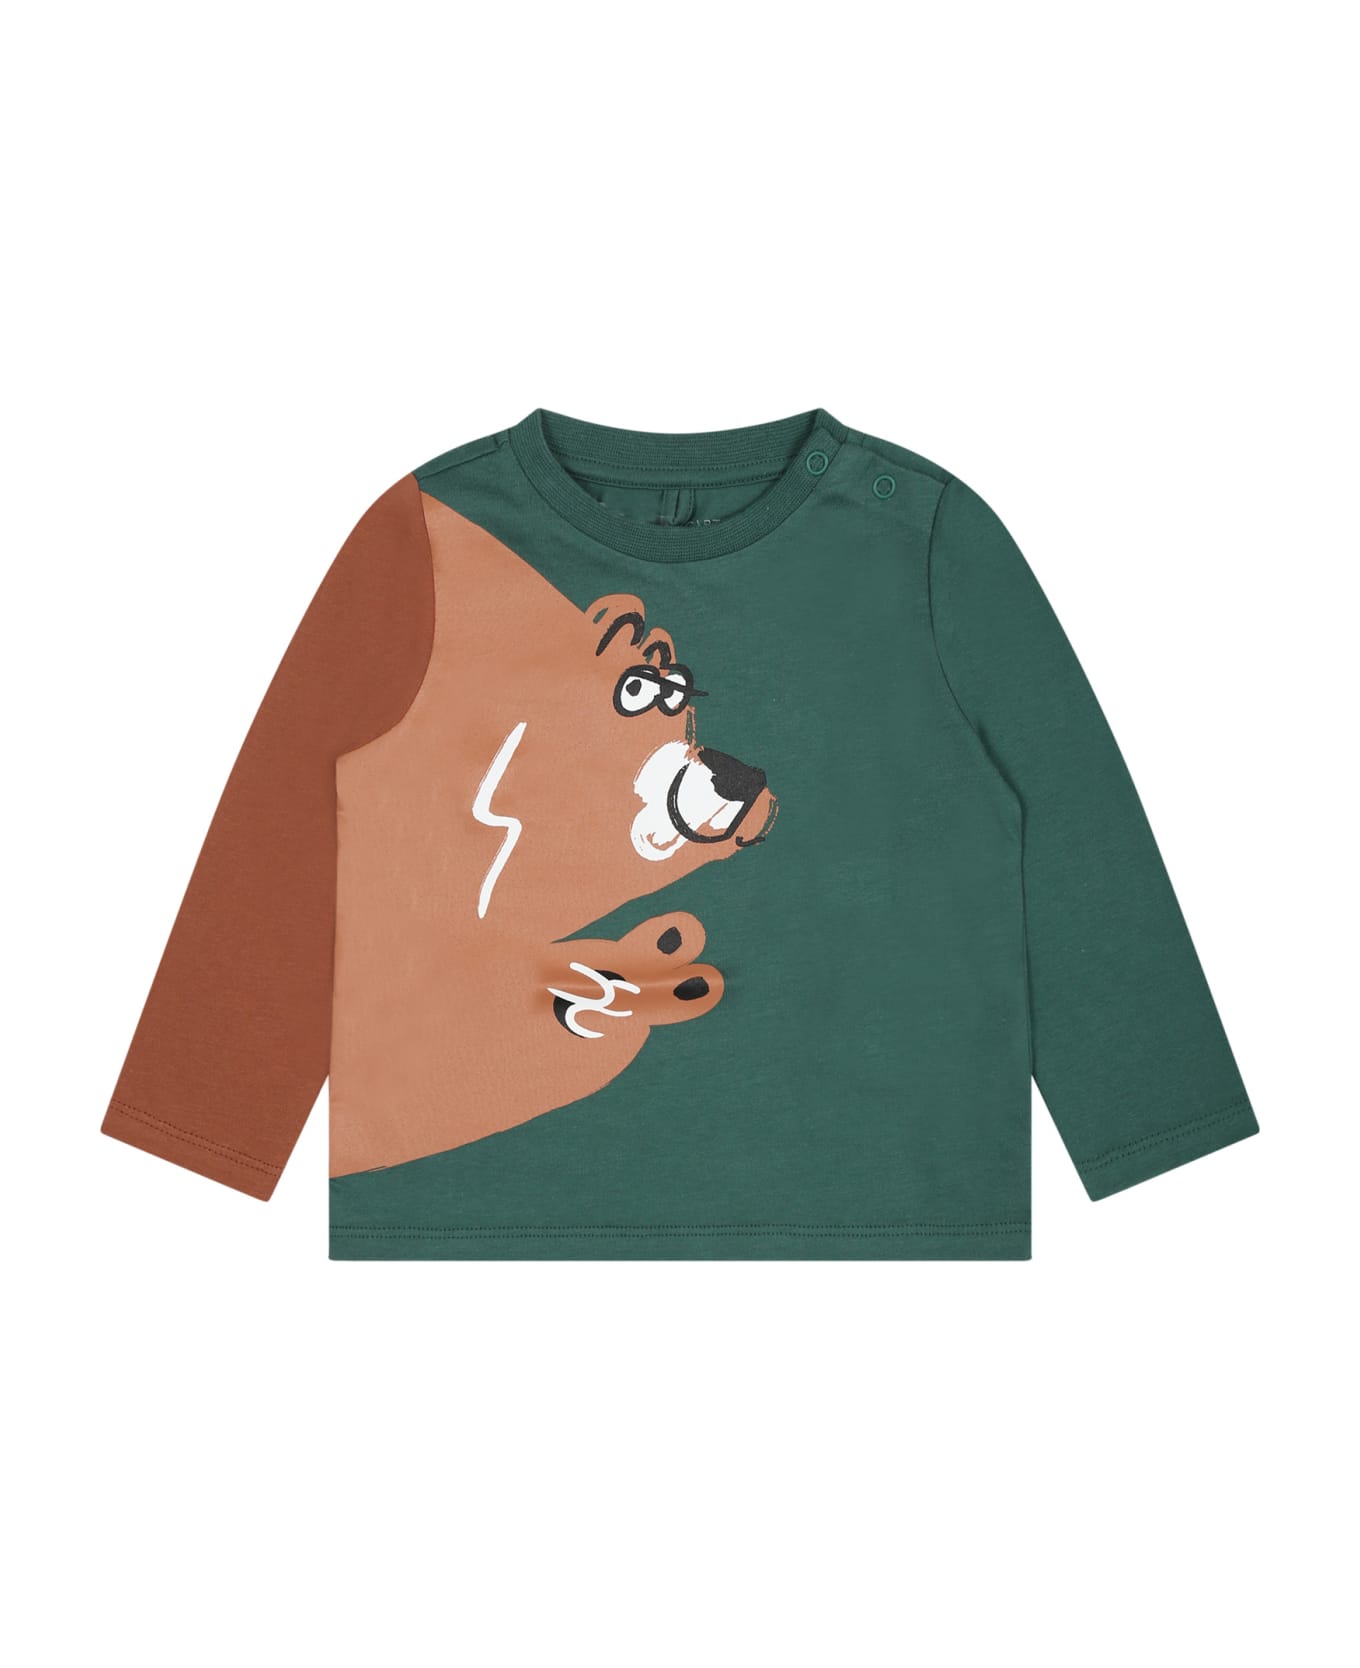 Stella McCartney Kids Green T-shirt For Baby Boy With Logo And Print - Green